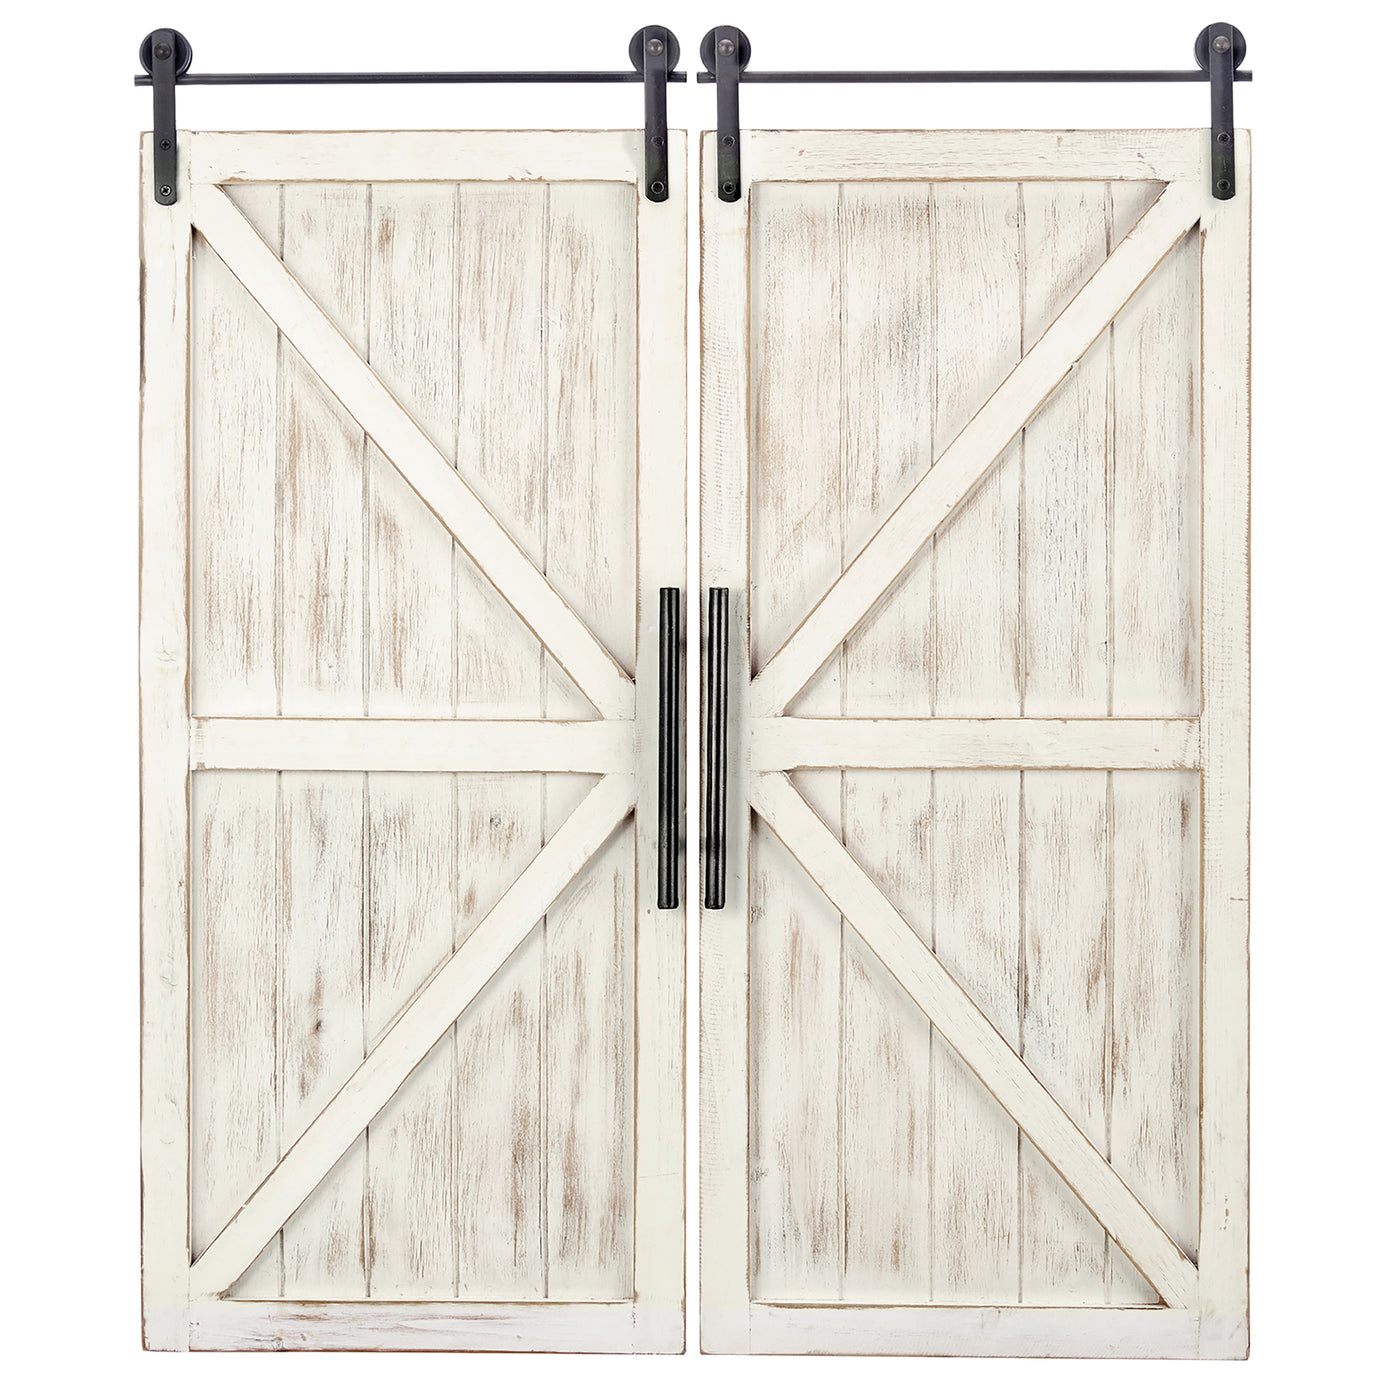 FirsTime & Co. White Carriage Barn Door Wall Plaque 2-Piece Set, Farmhouse, Wood, 14 x 2 x 34 inches